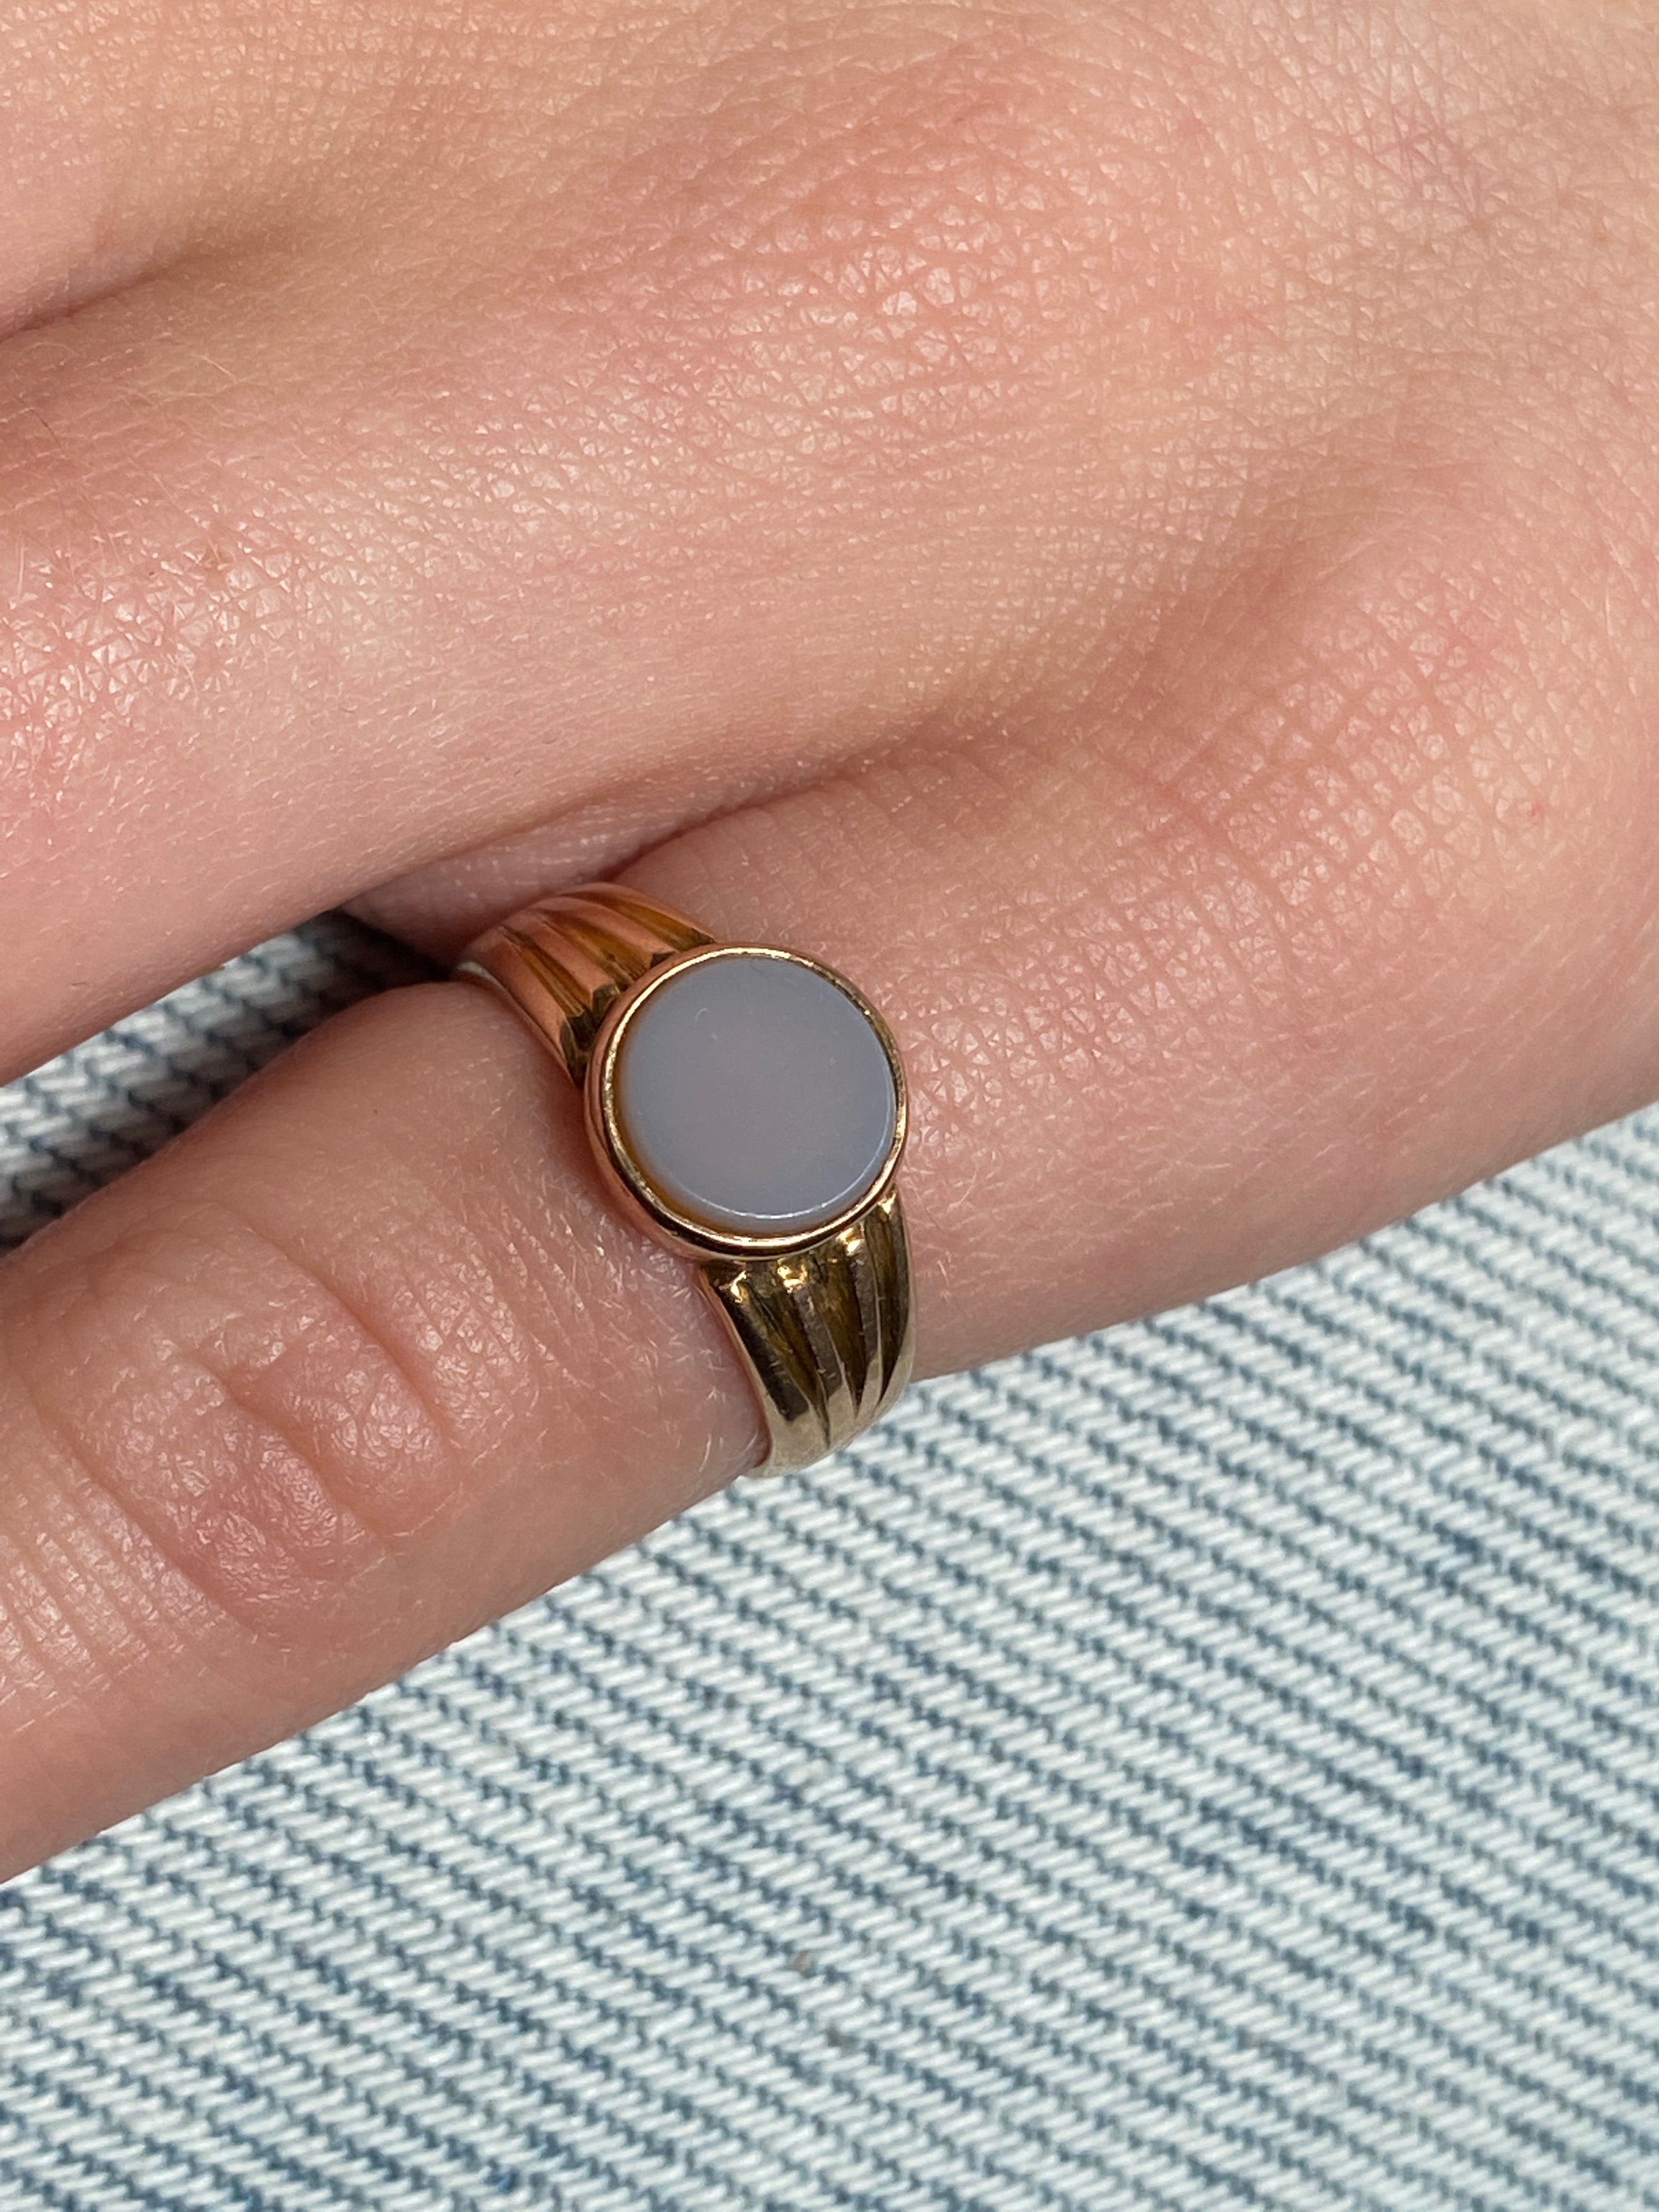 Antique Chalcedony Signet Ring